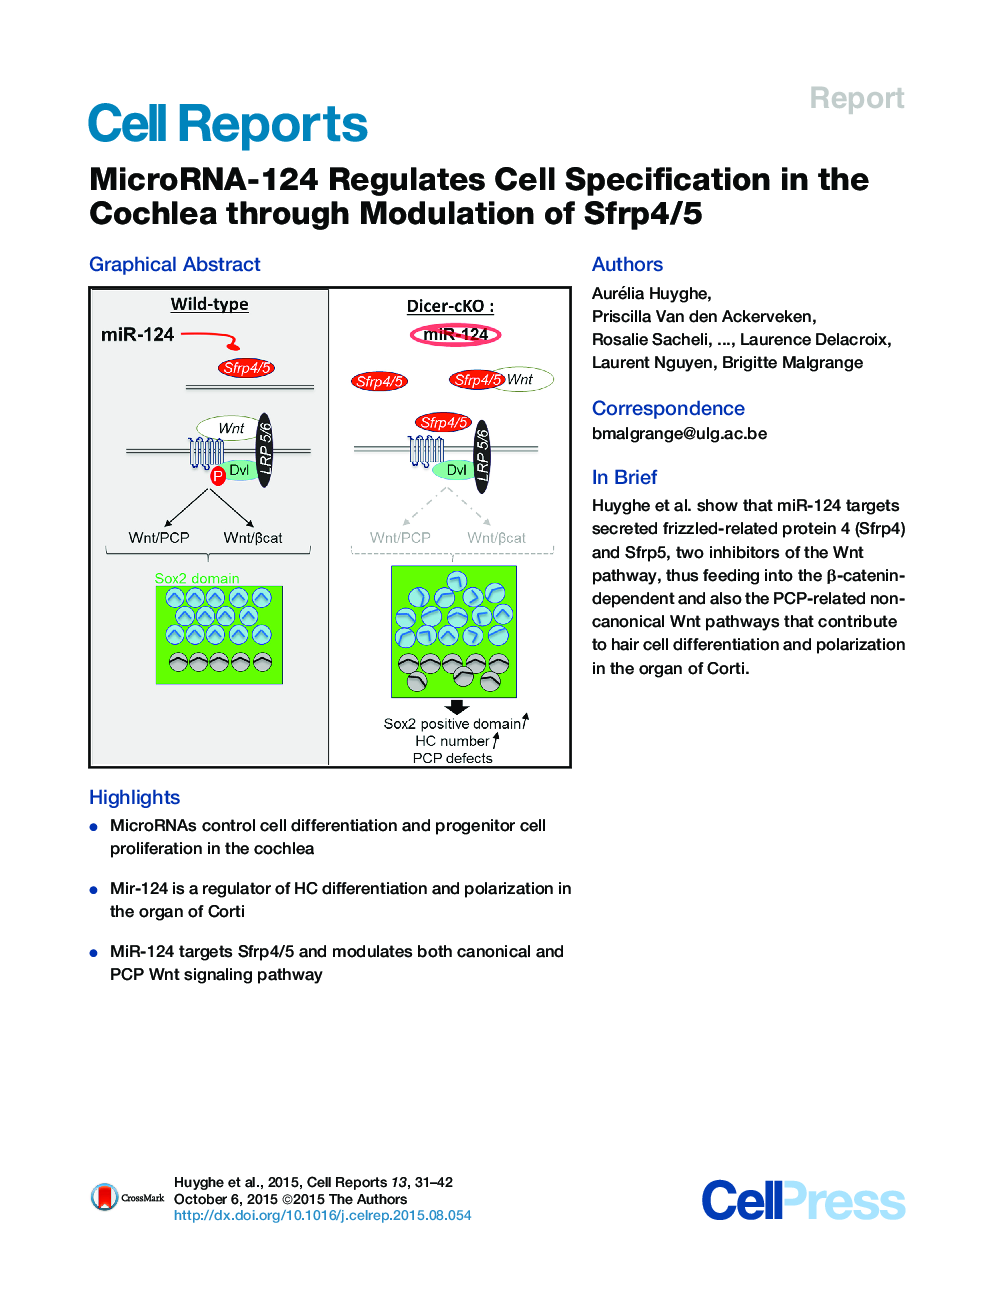 MicroRNA-124 Regulates Cell Specification in the Cochlea through Modulation of Sfrp4/5 